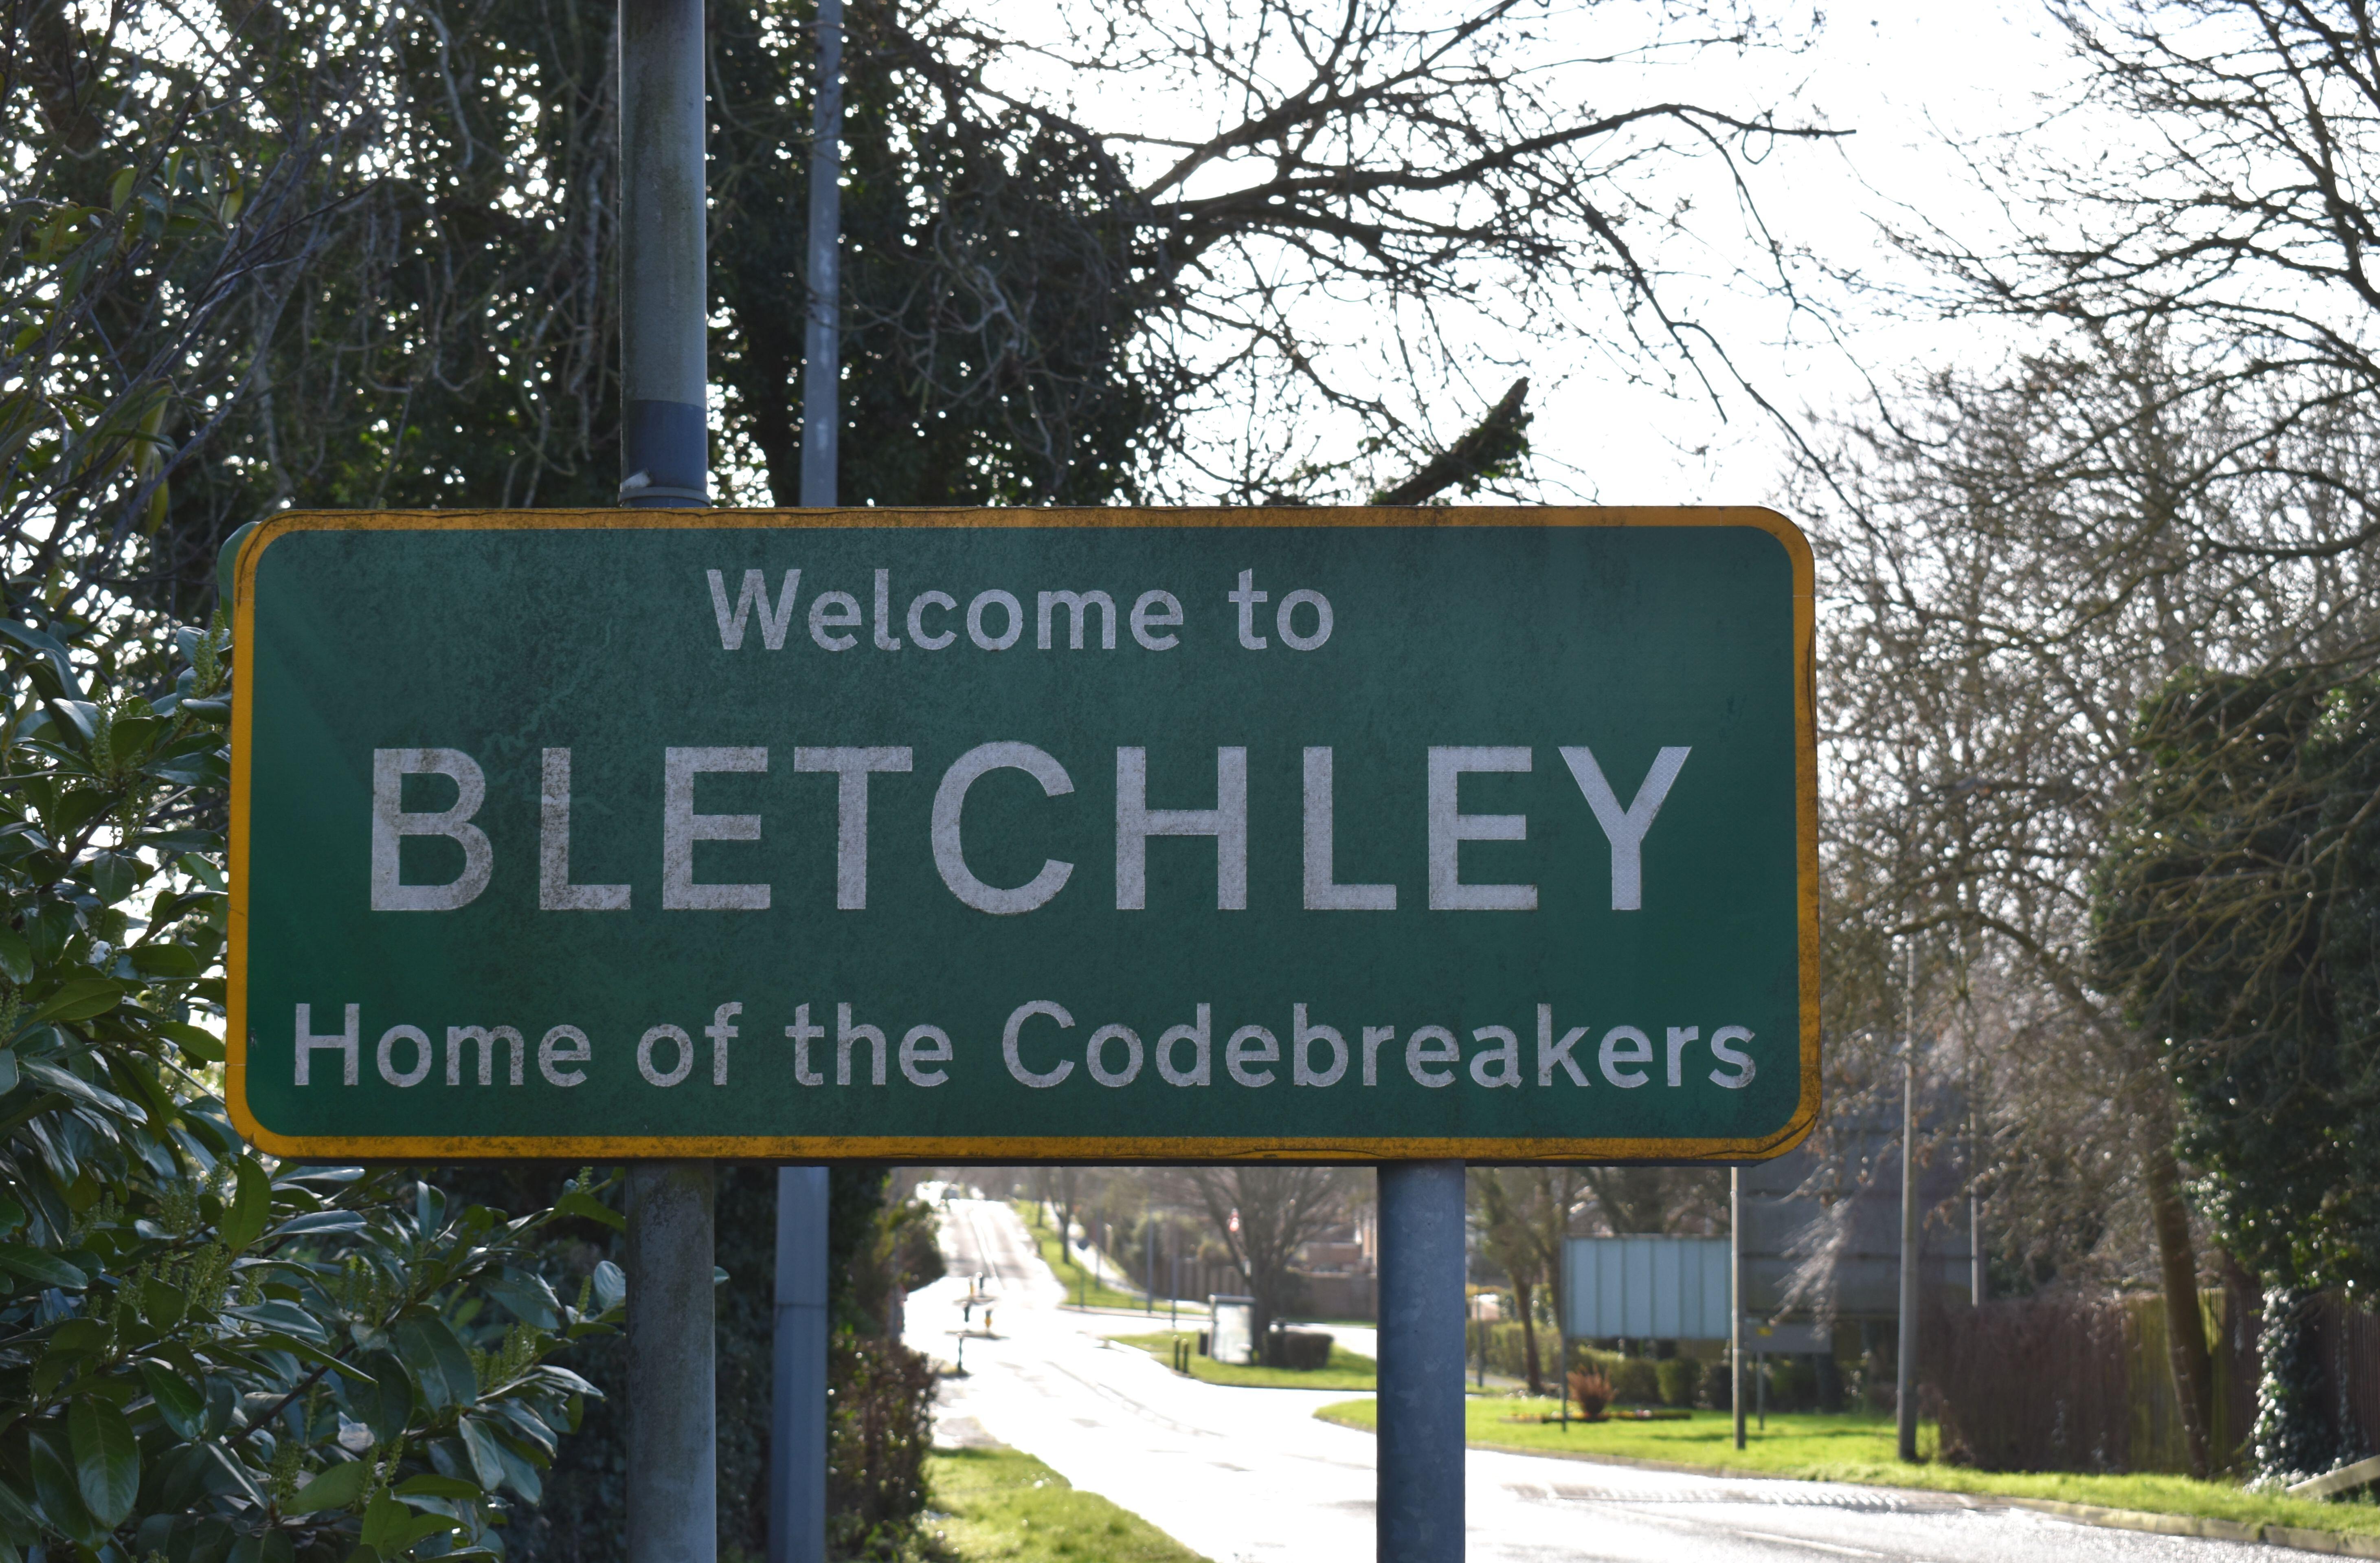 From Dark Reading – Global AI Cybersecurity Agreement Signed At Turing’s Bletchley Park